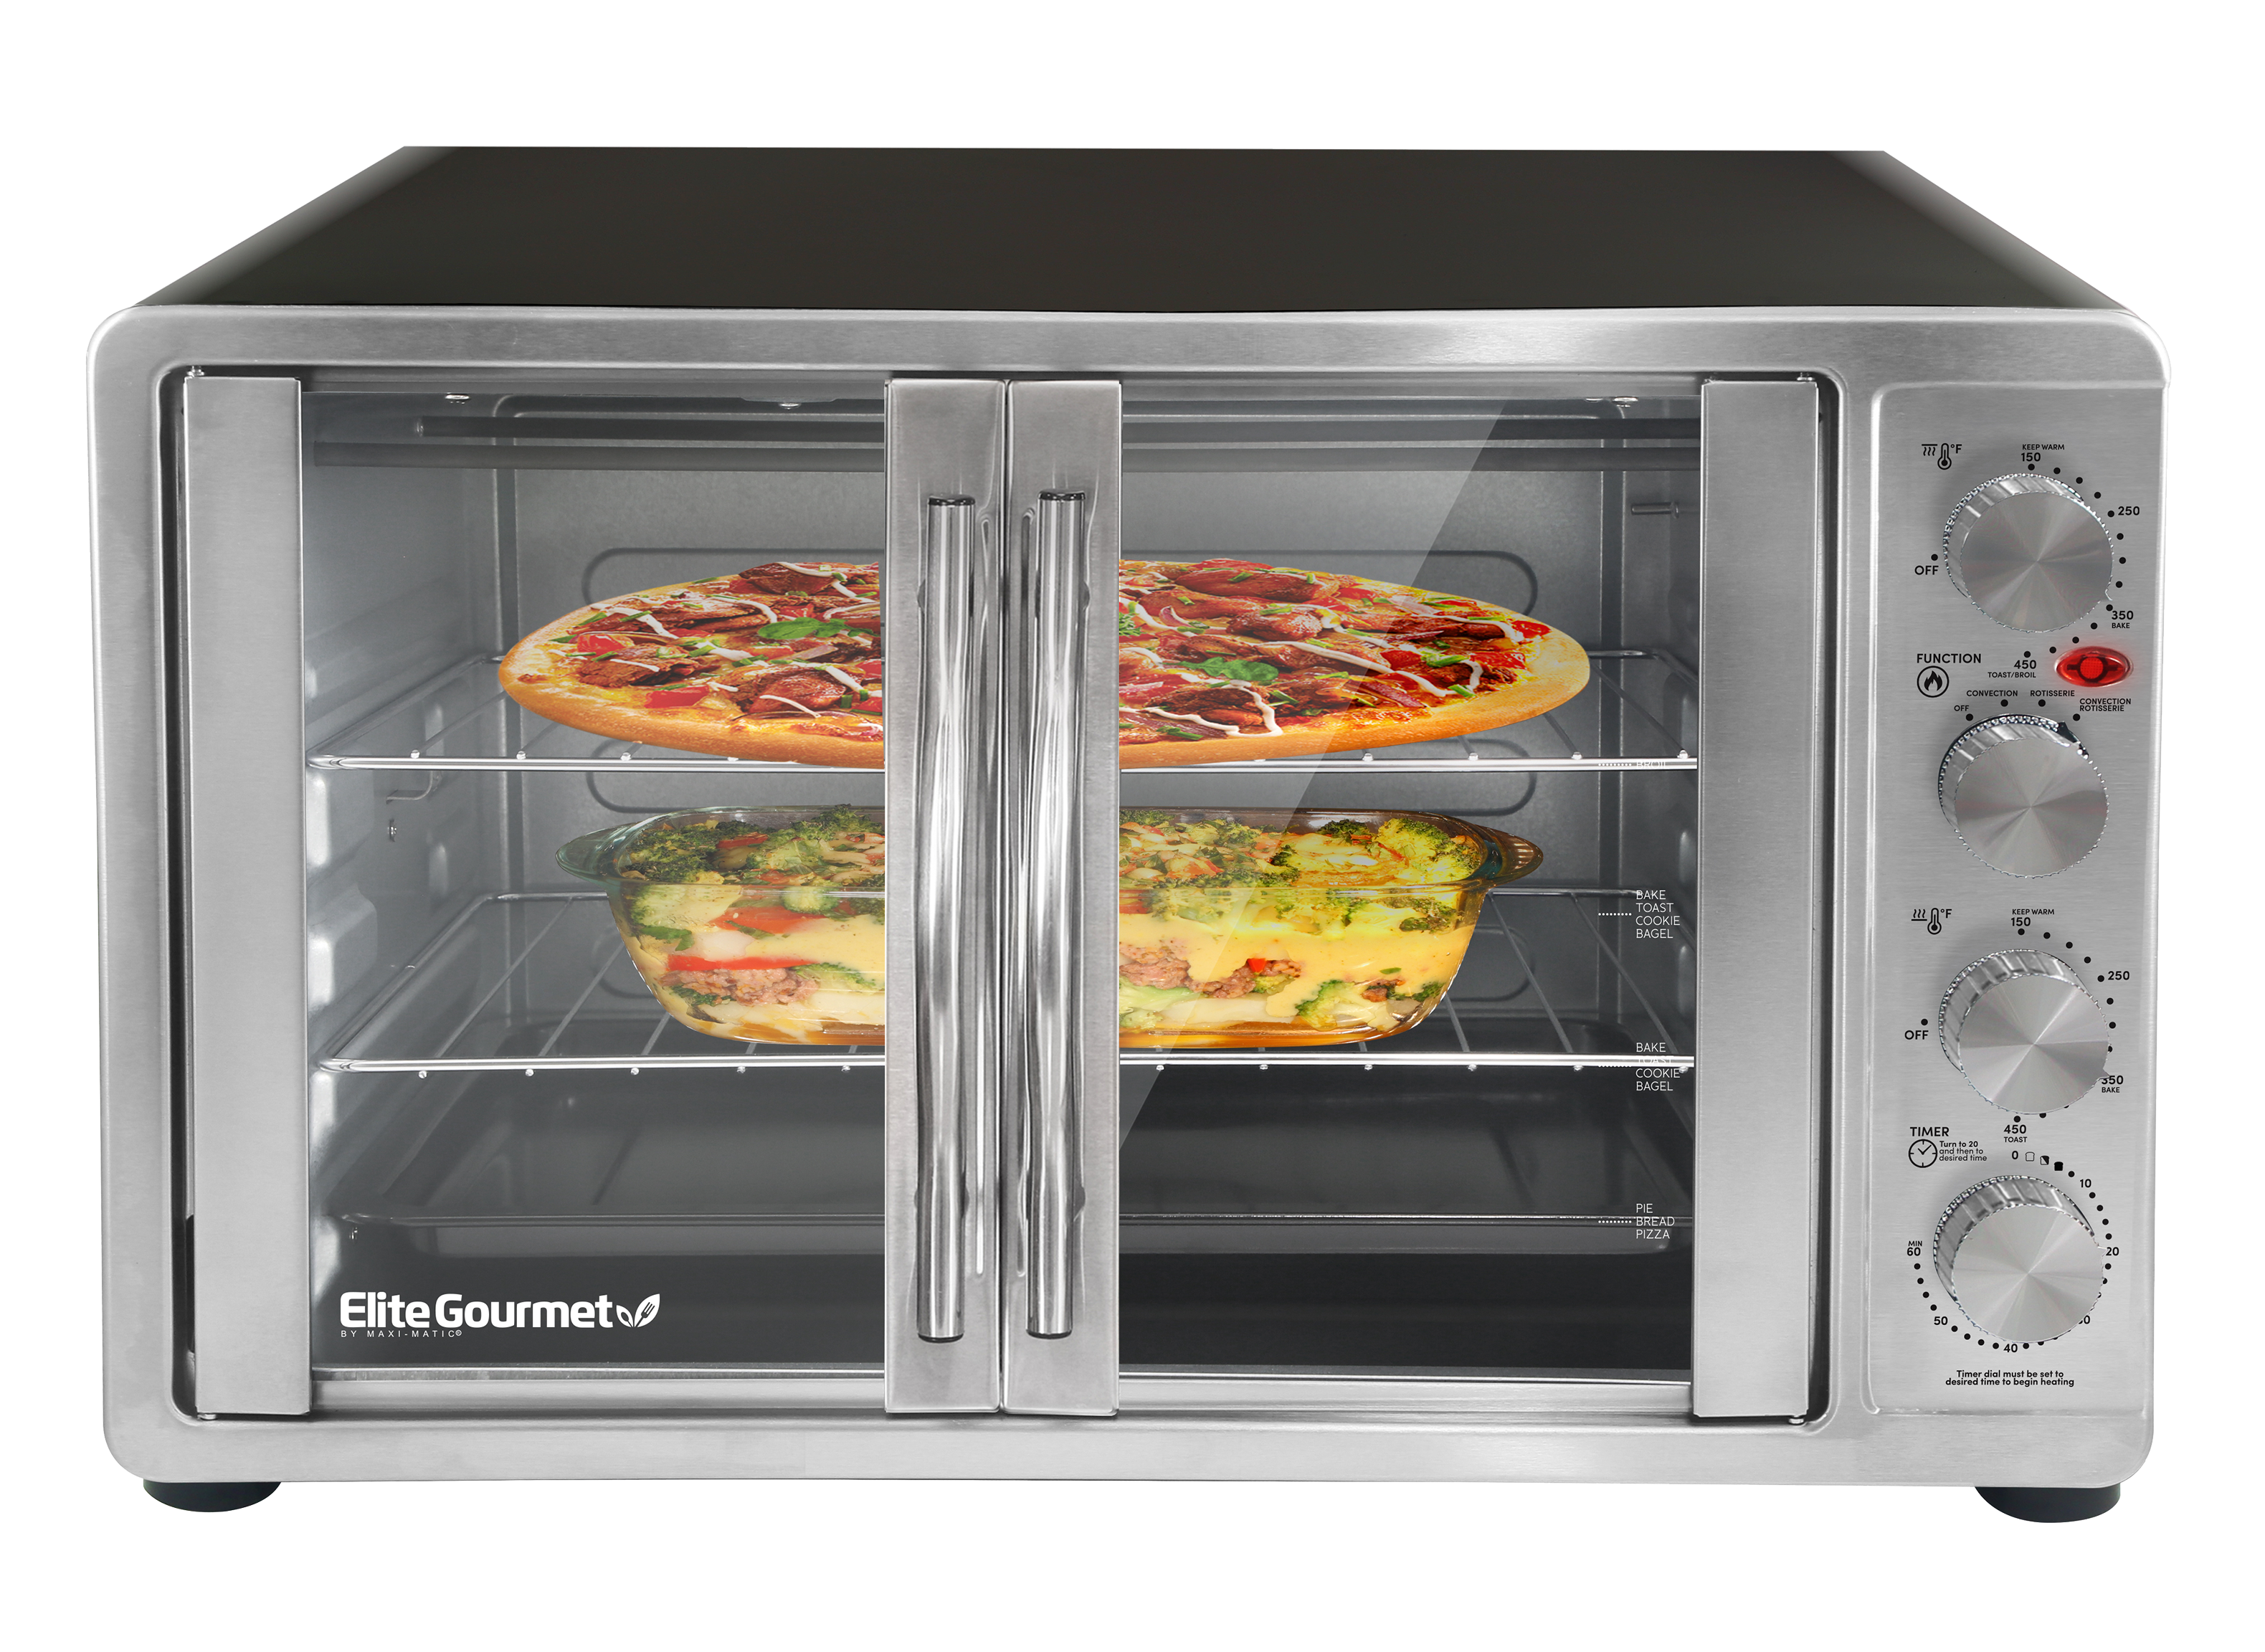 https://crdms.images.consumerreports.org/prod/products/cr/models/403036-toaster-ovens-elite-platinum-eto-4510m-double-french-door-10017863.png